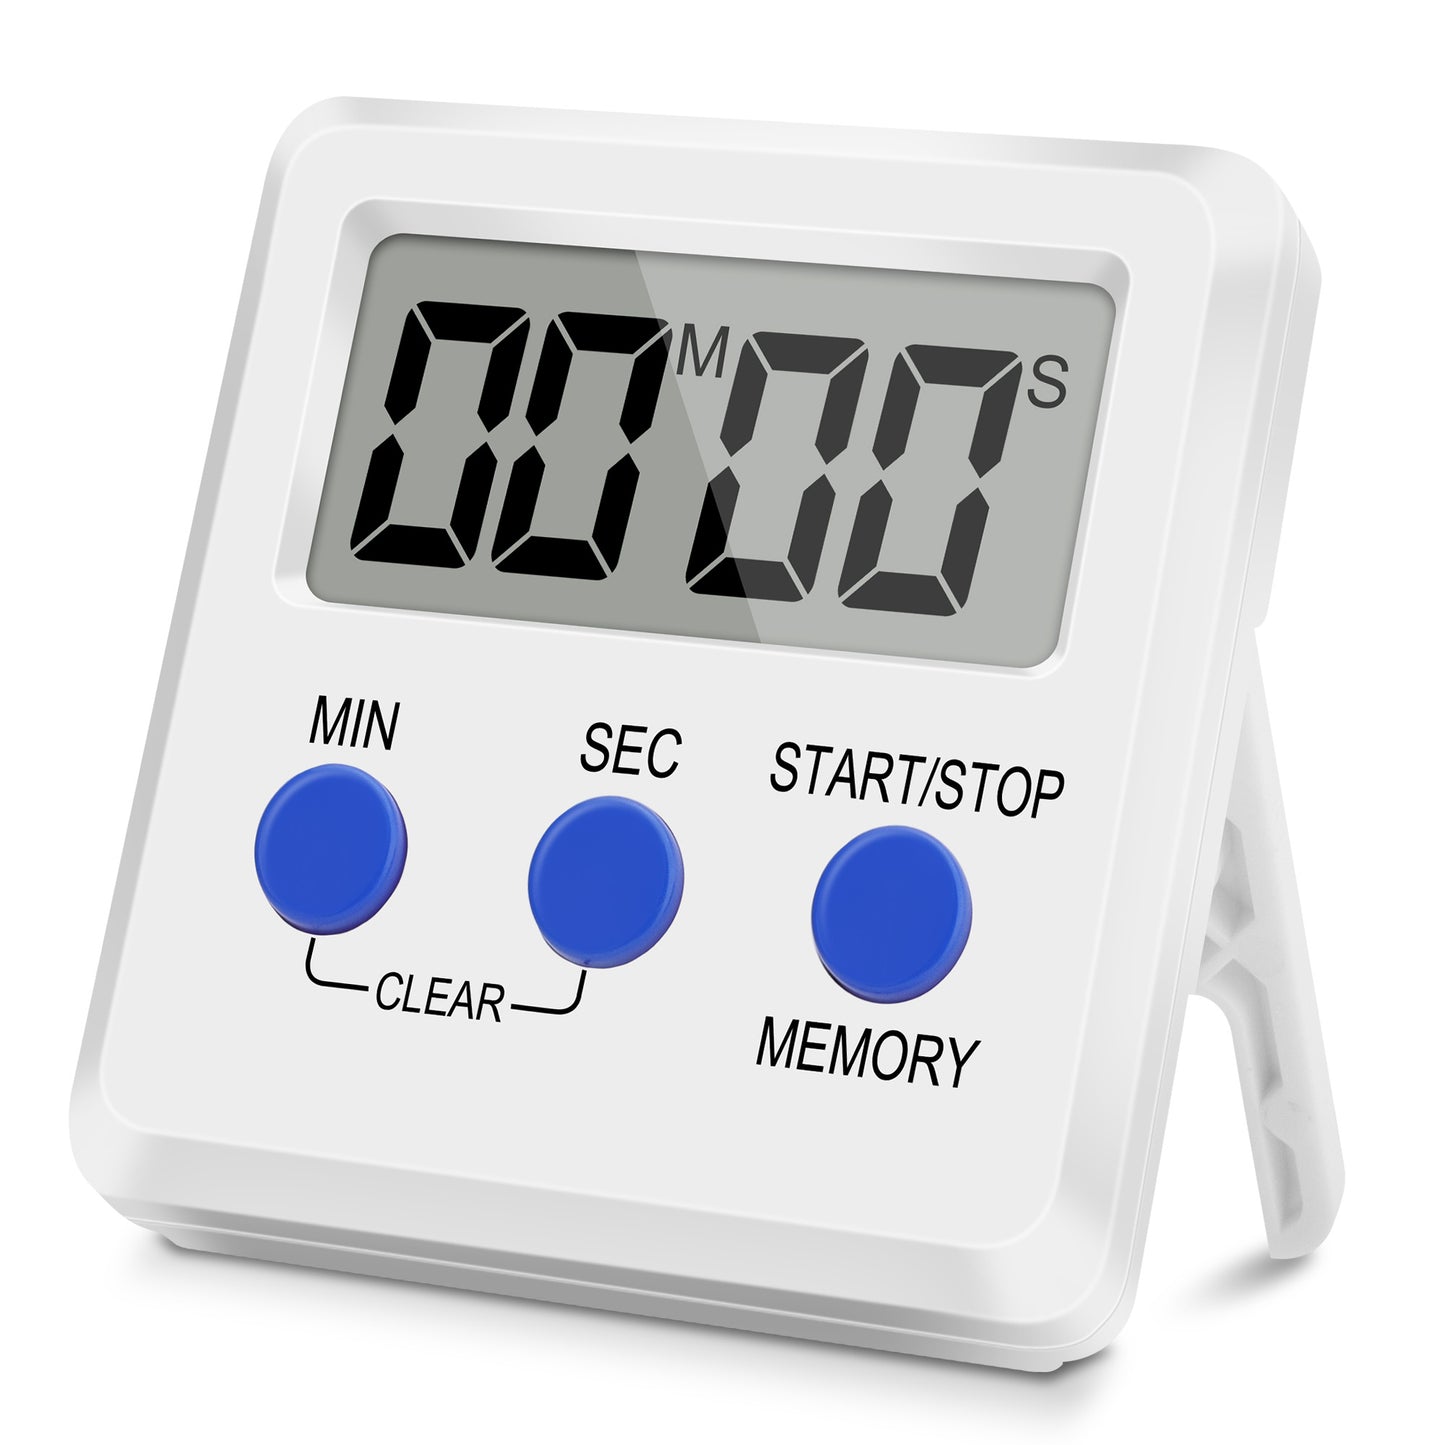 Magnetic LCD Digital Kitchen Timer - Count UP or Down and Memory Function With Adjustable Stand, Loud Alarm for Home Exercise Baking Playtime Learning Sports (White)